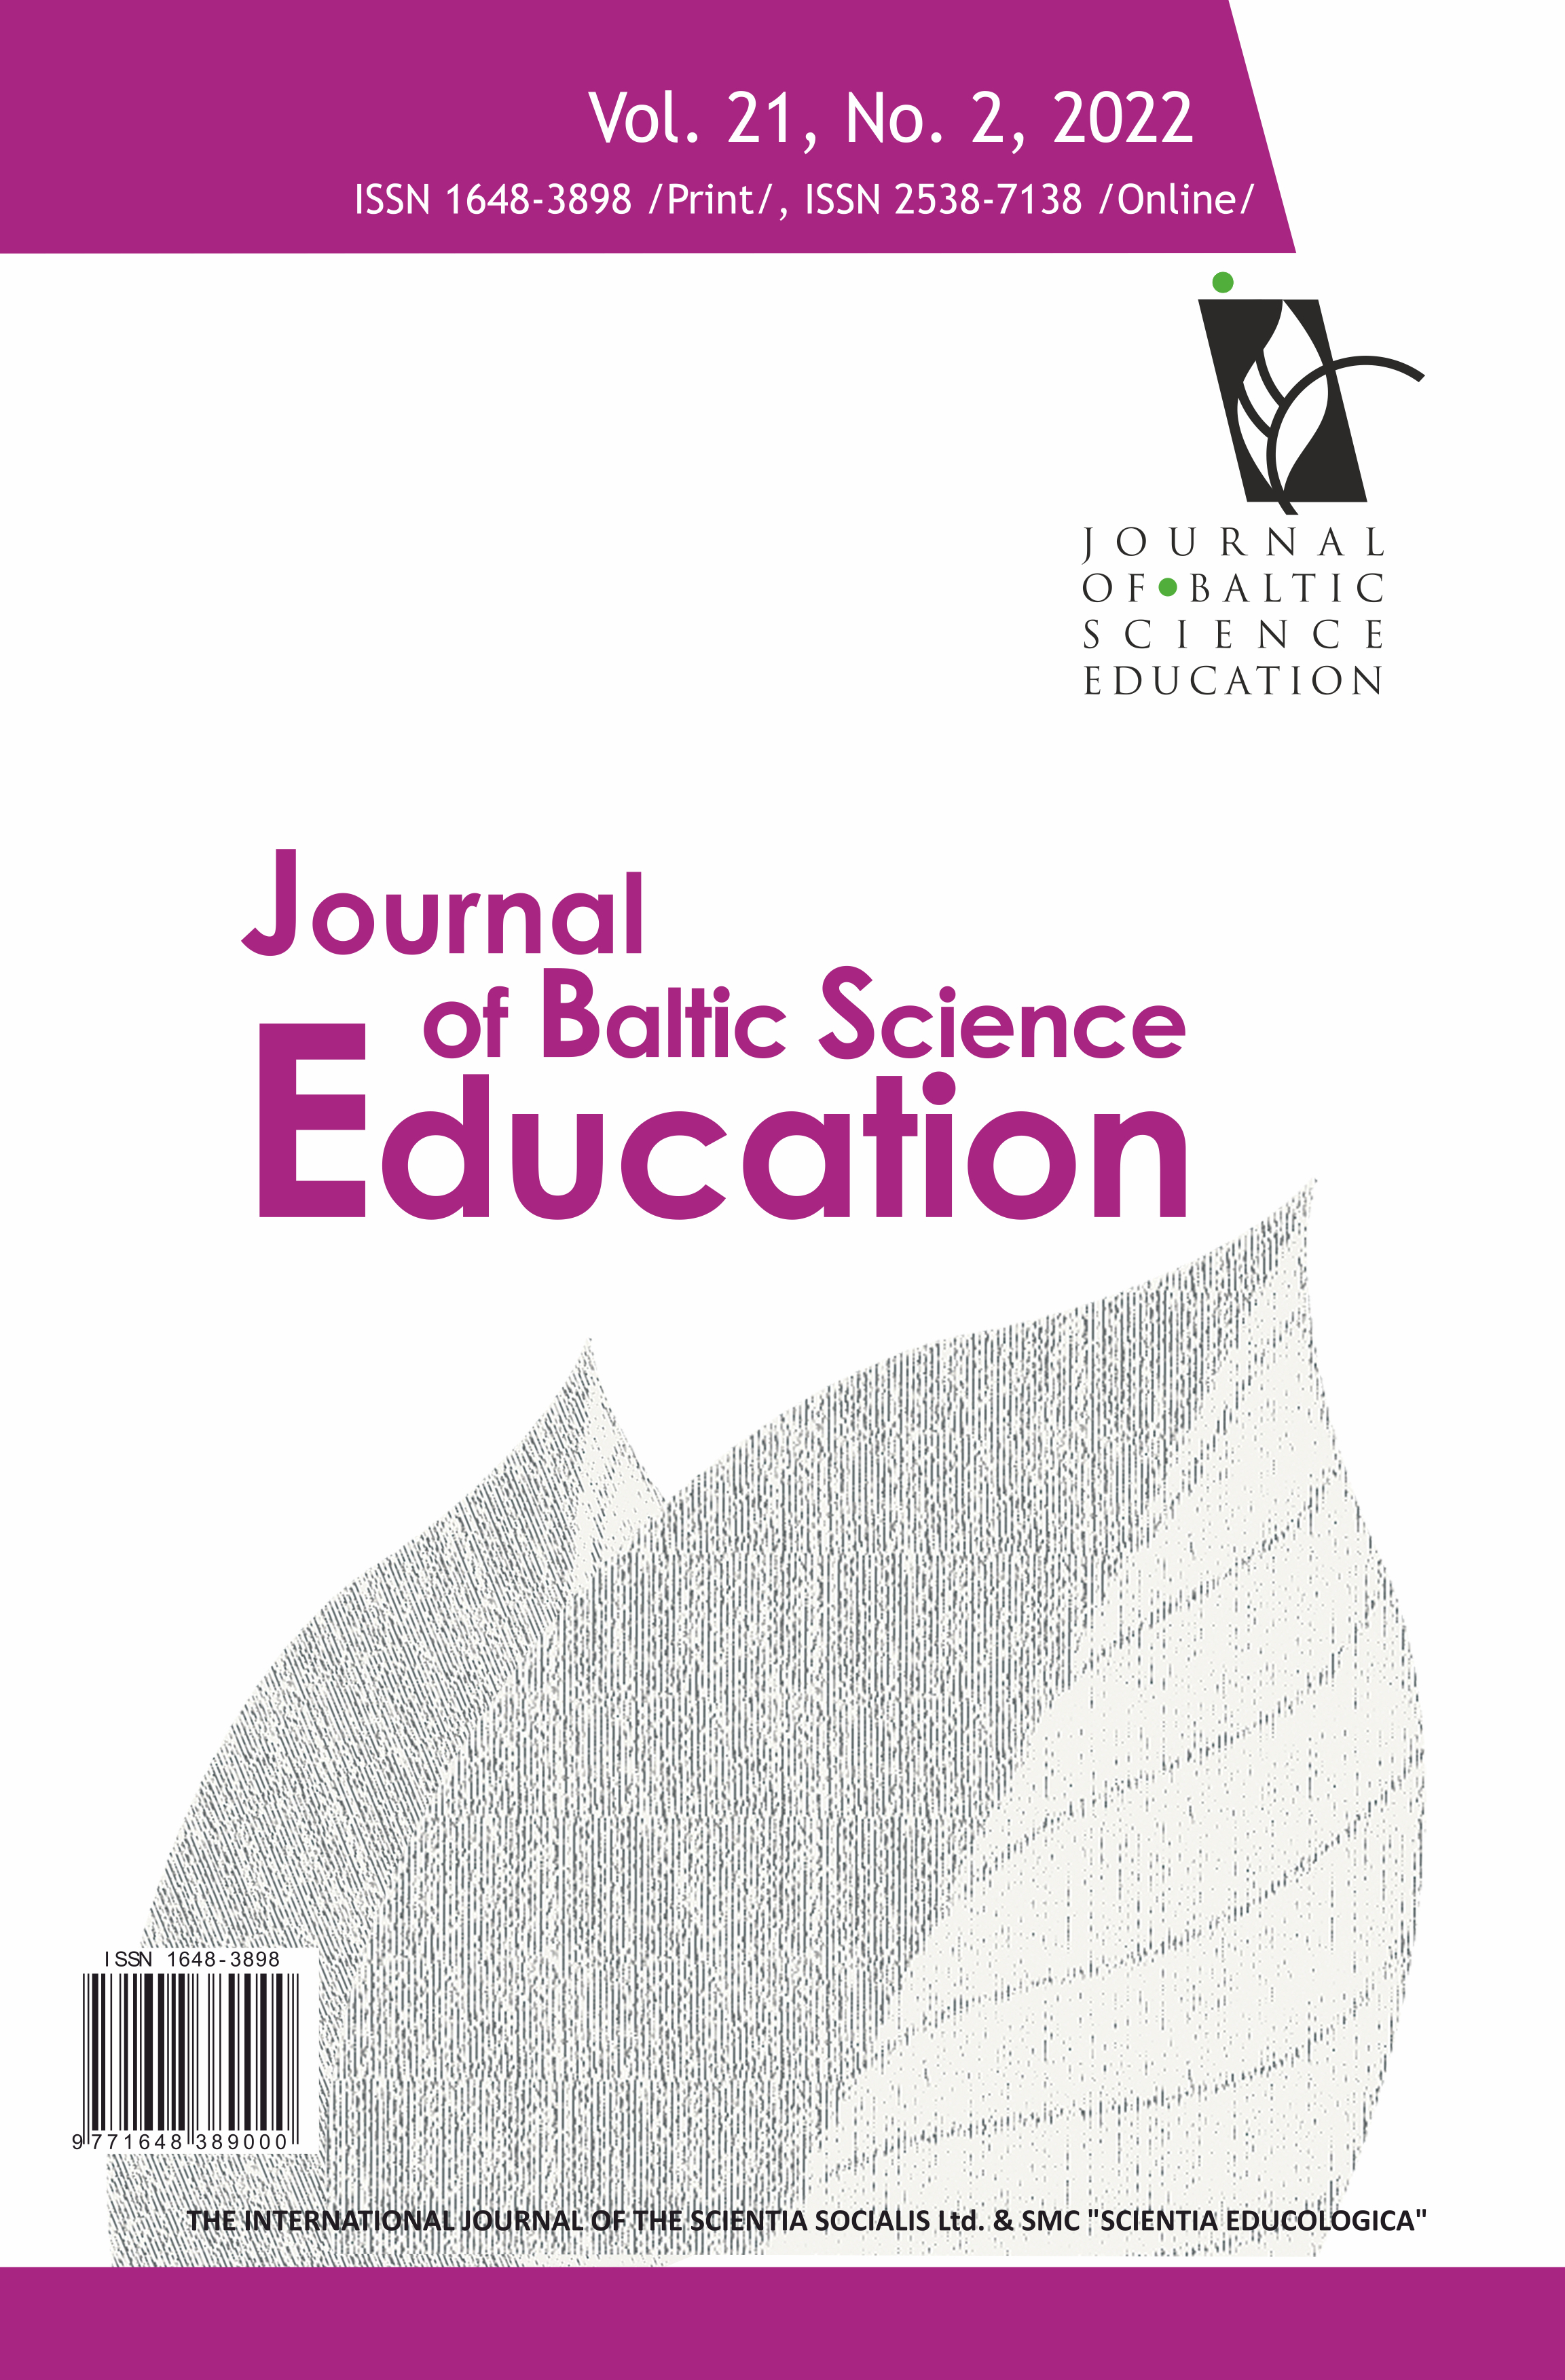 PRIMARY PRE-SERVICE TEACHERS’ METAPHORICAL PERCEPTIONS OF THE CONCEPT OF ENVIRONMENTAL POLLUTION